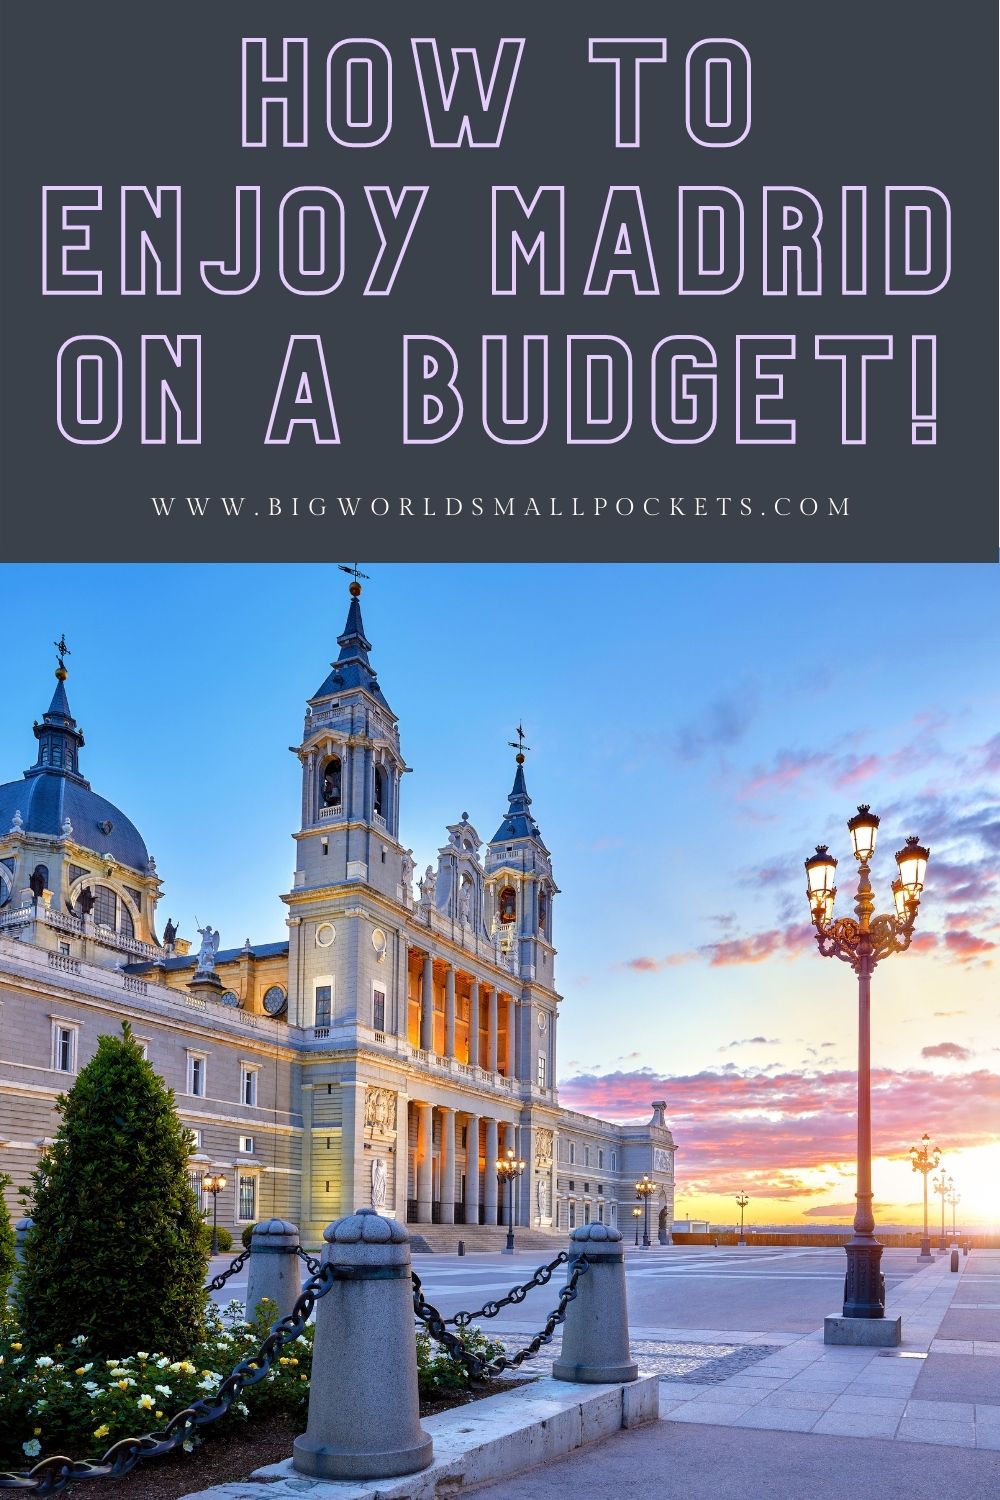 How to Enjoy Madrid Without Going Broke!